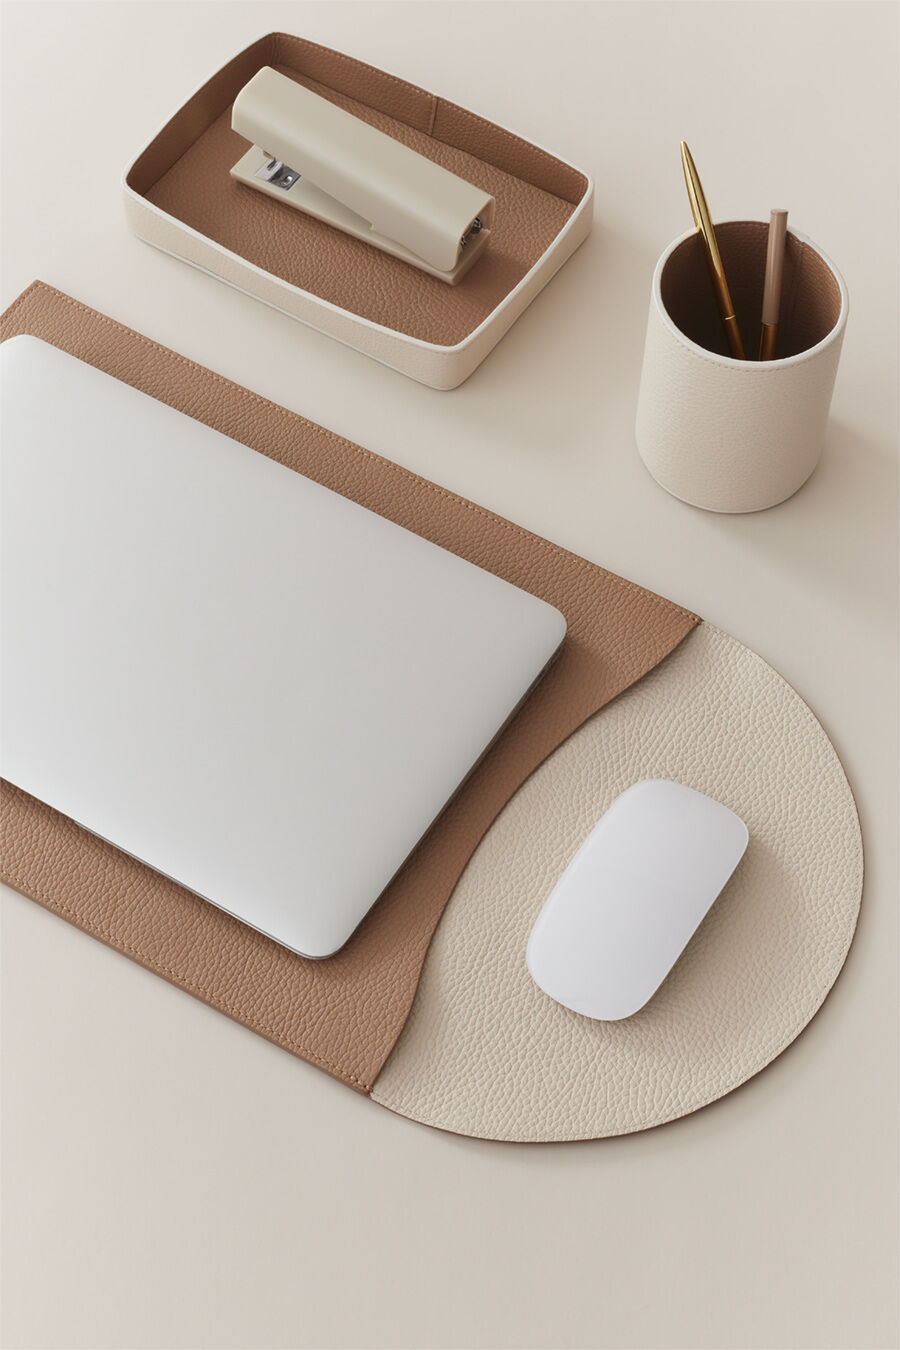 Laptop, mouse on oval mat, and stationery holder on desk tray.